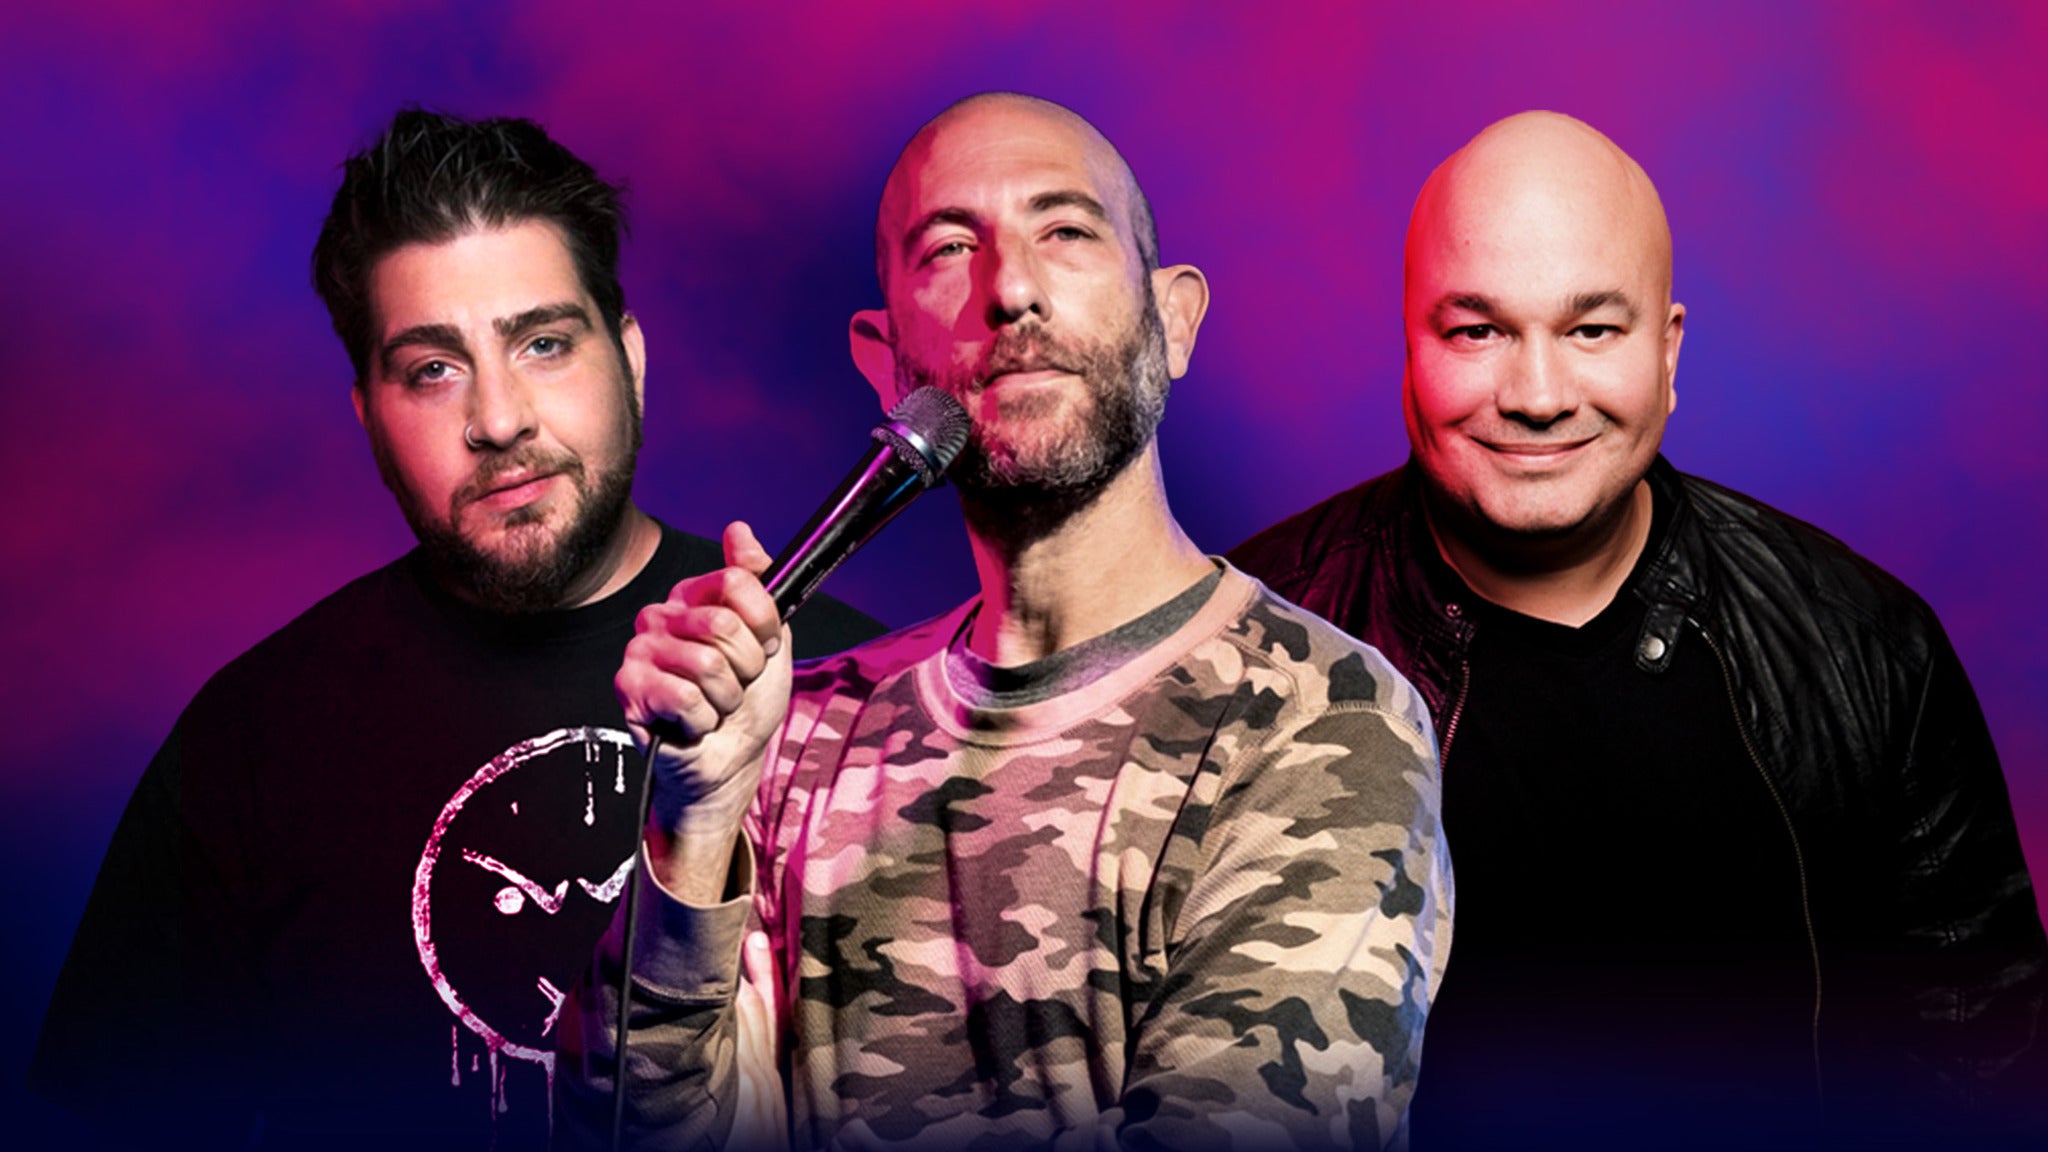 Ari Shaffir, Big Jay Oakerson, and Robert Kelly presale code for early tickets in Detroit